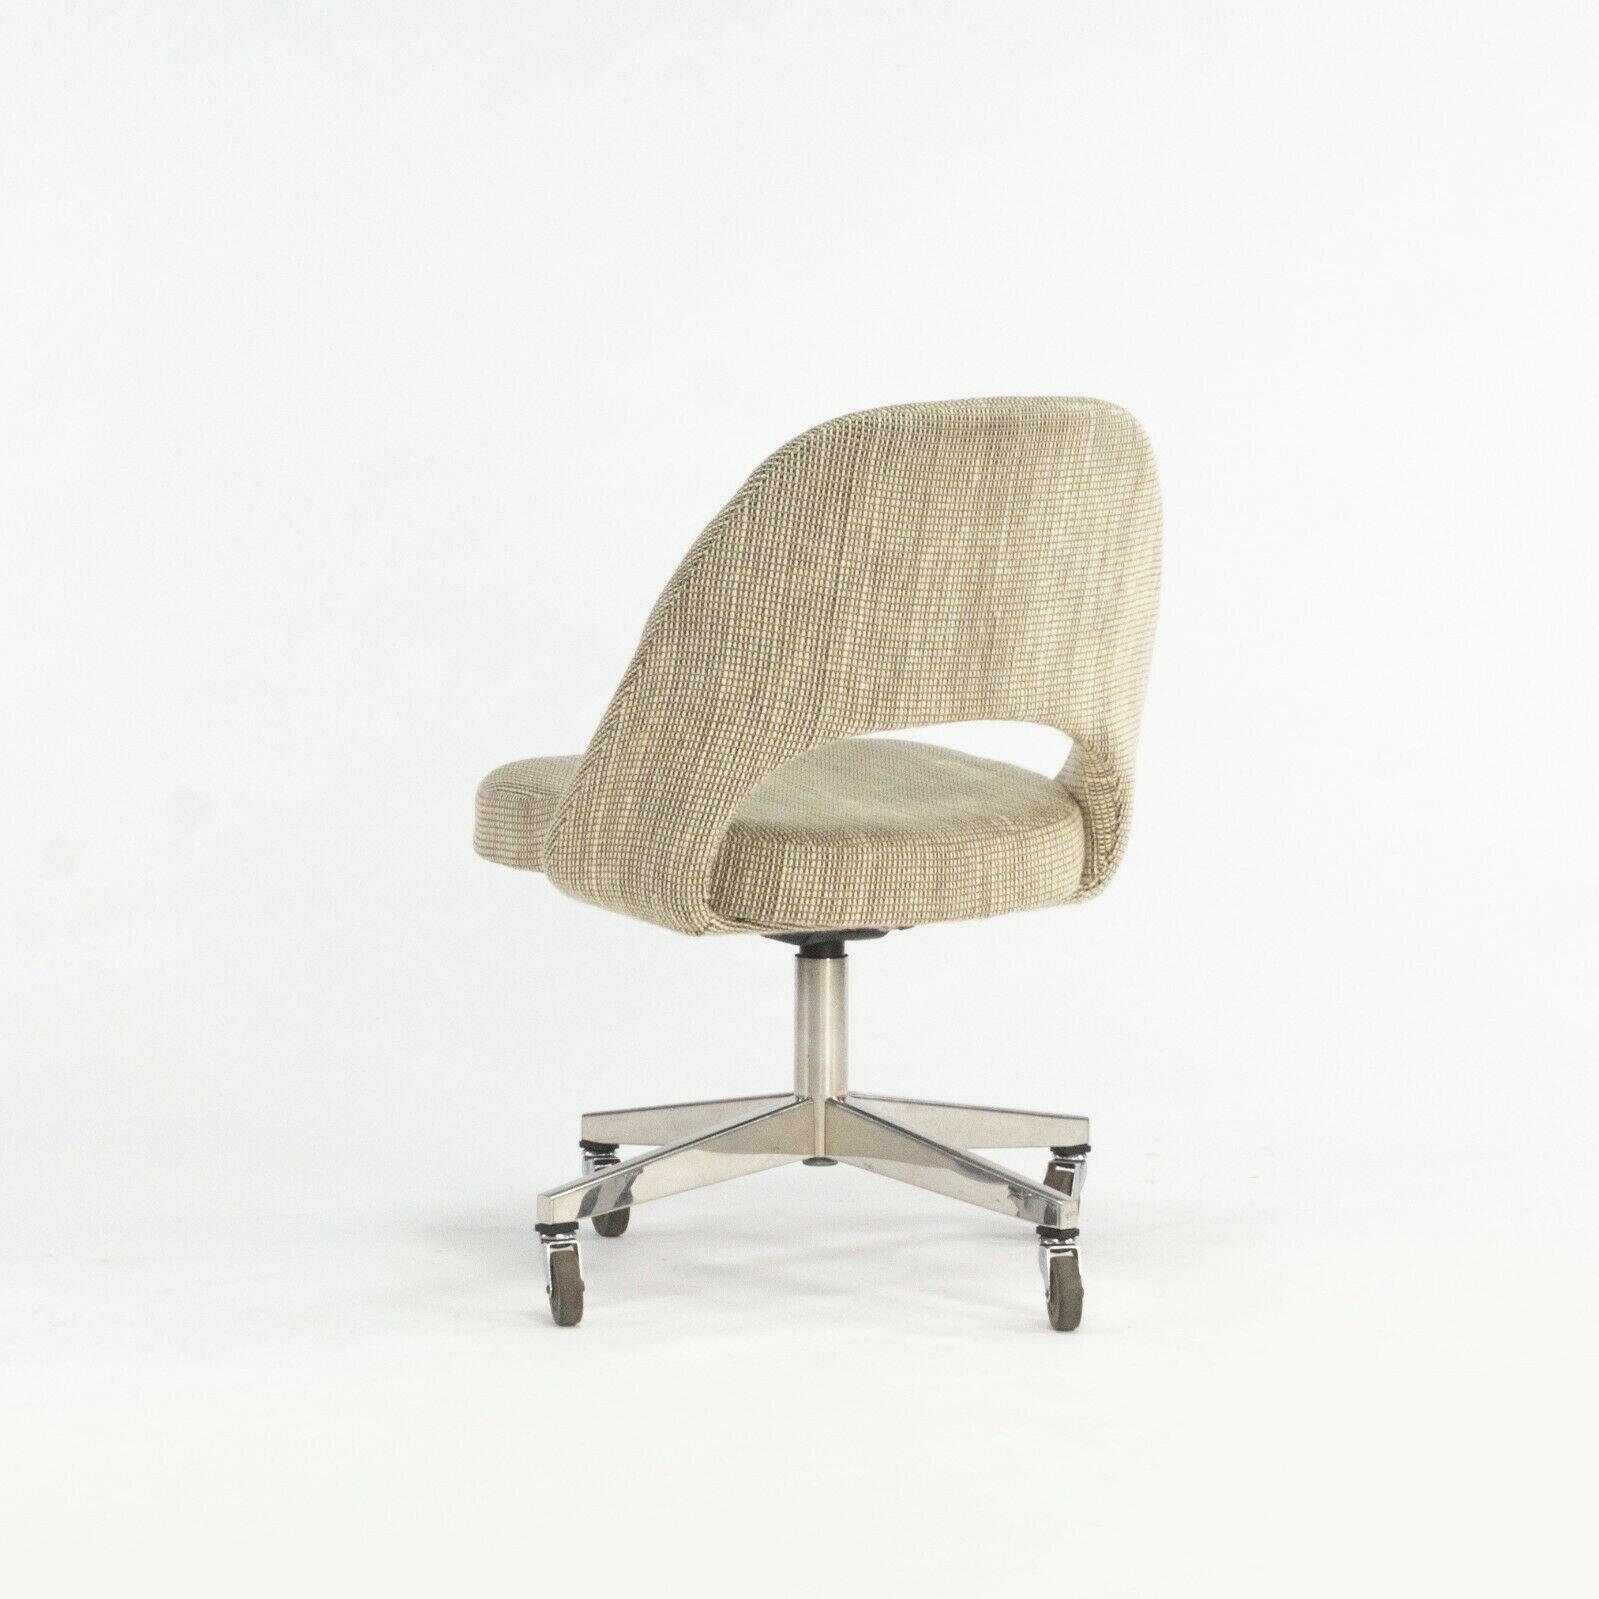 1974 Eero Saarinen for Knoll Rolling Executive Office Chairs Original Tan Fabric For Sale 1